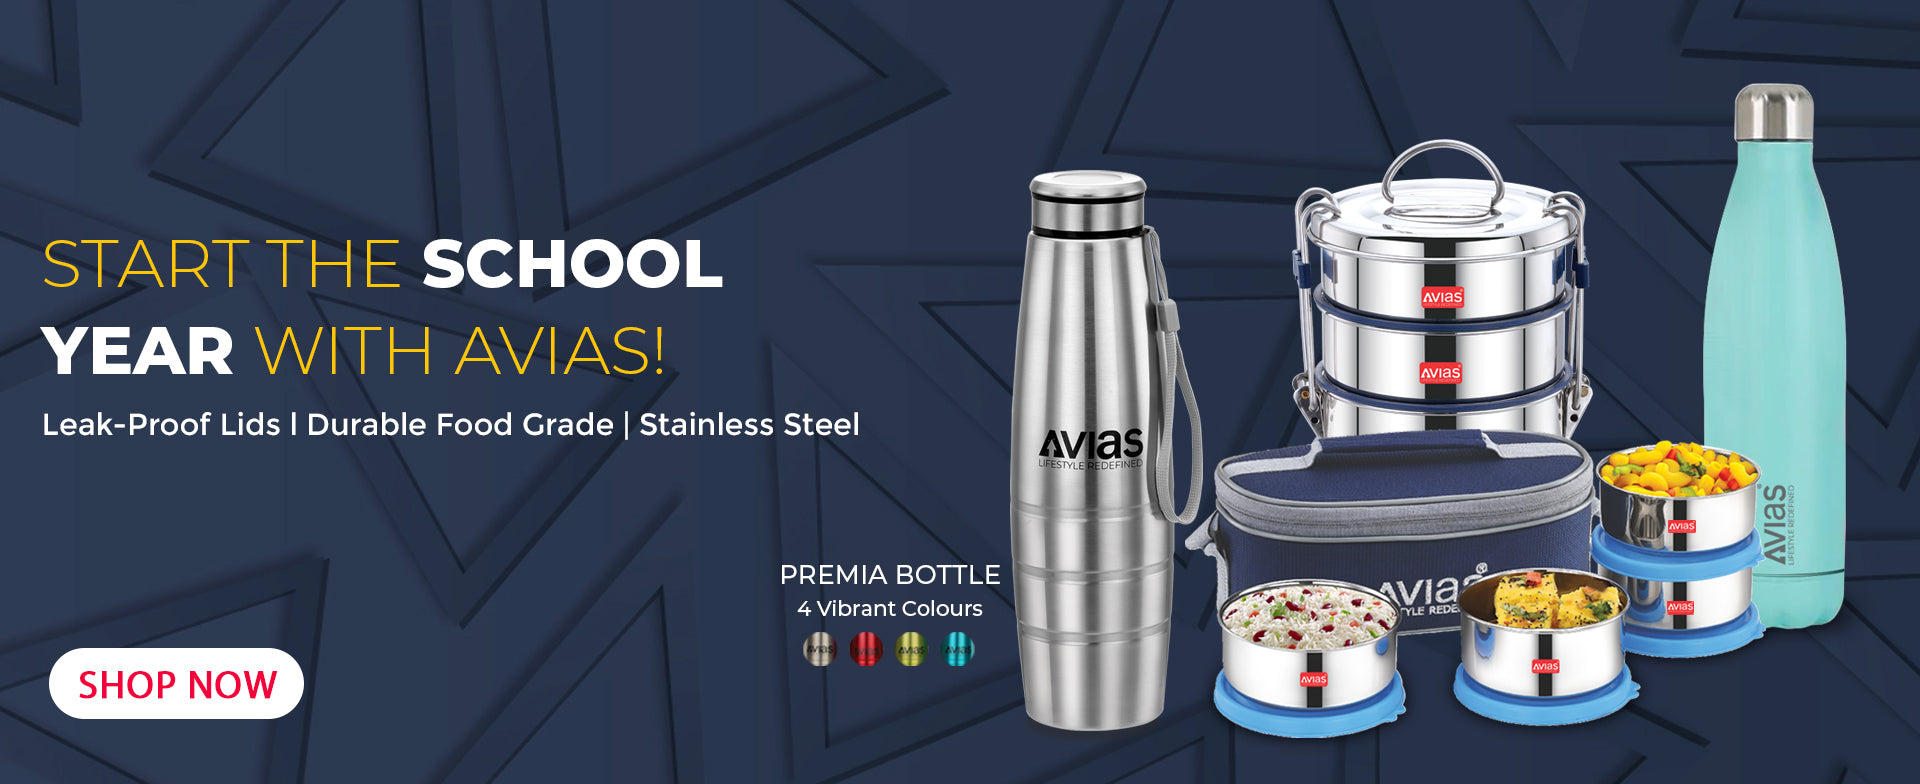 Avias Stainless Steel Lunch Boxes and Water Bottles for school